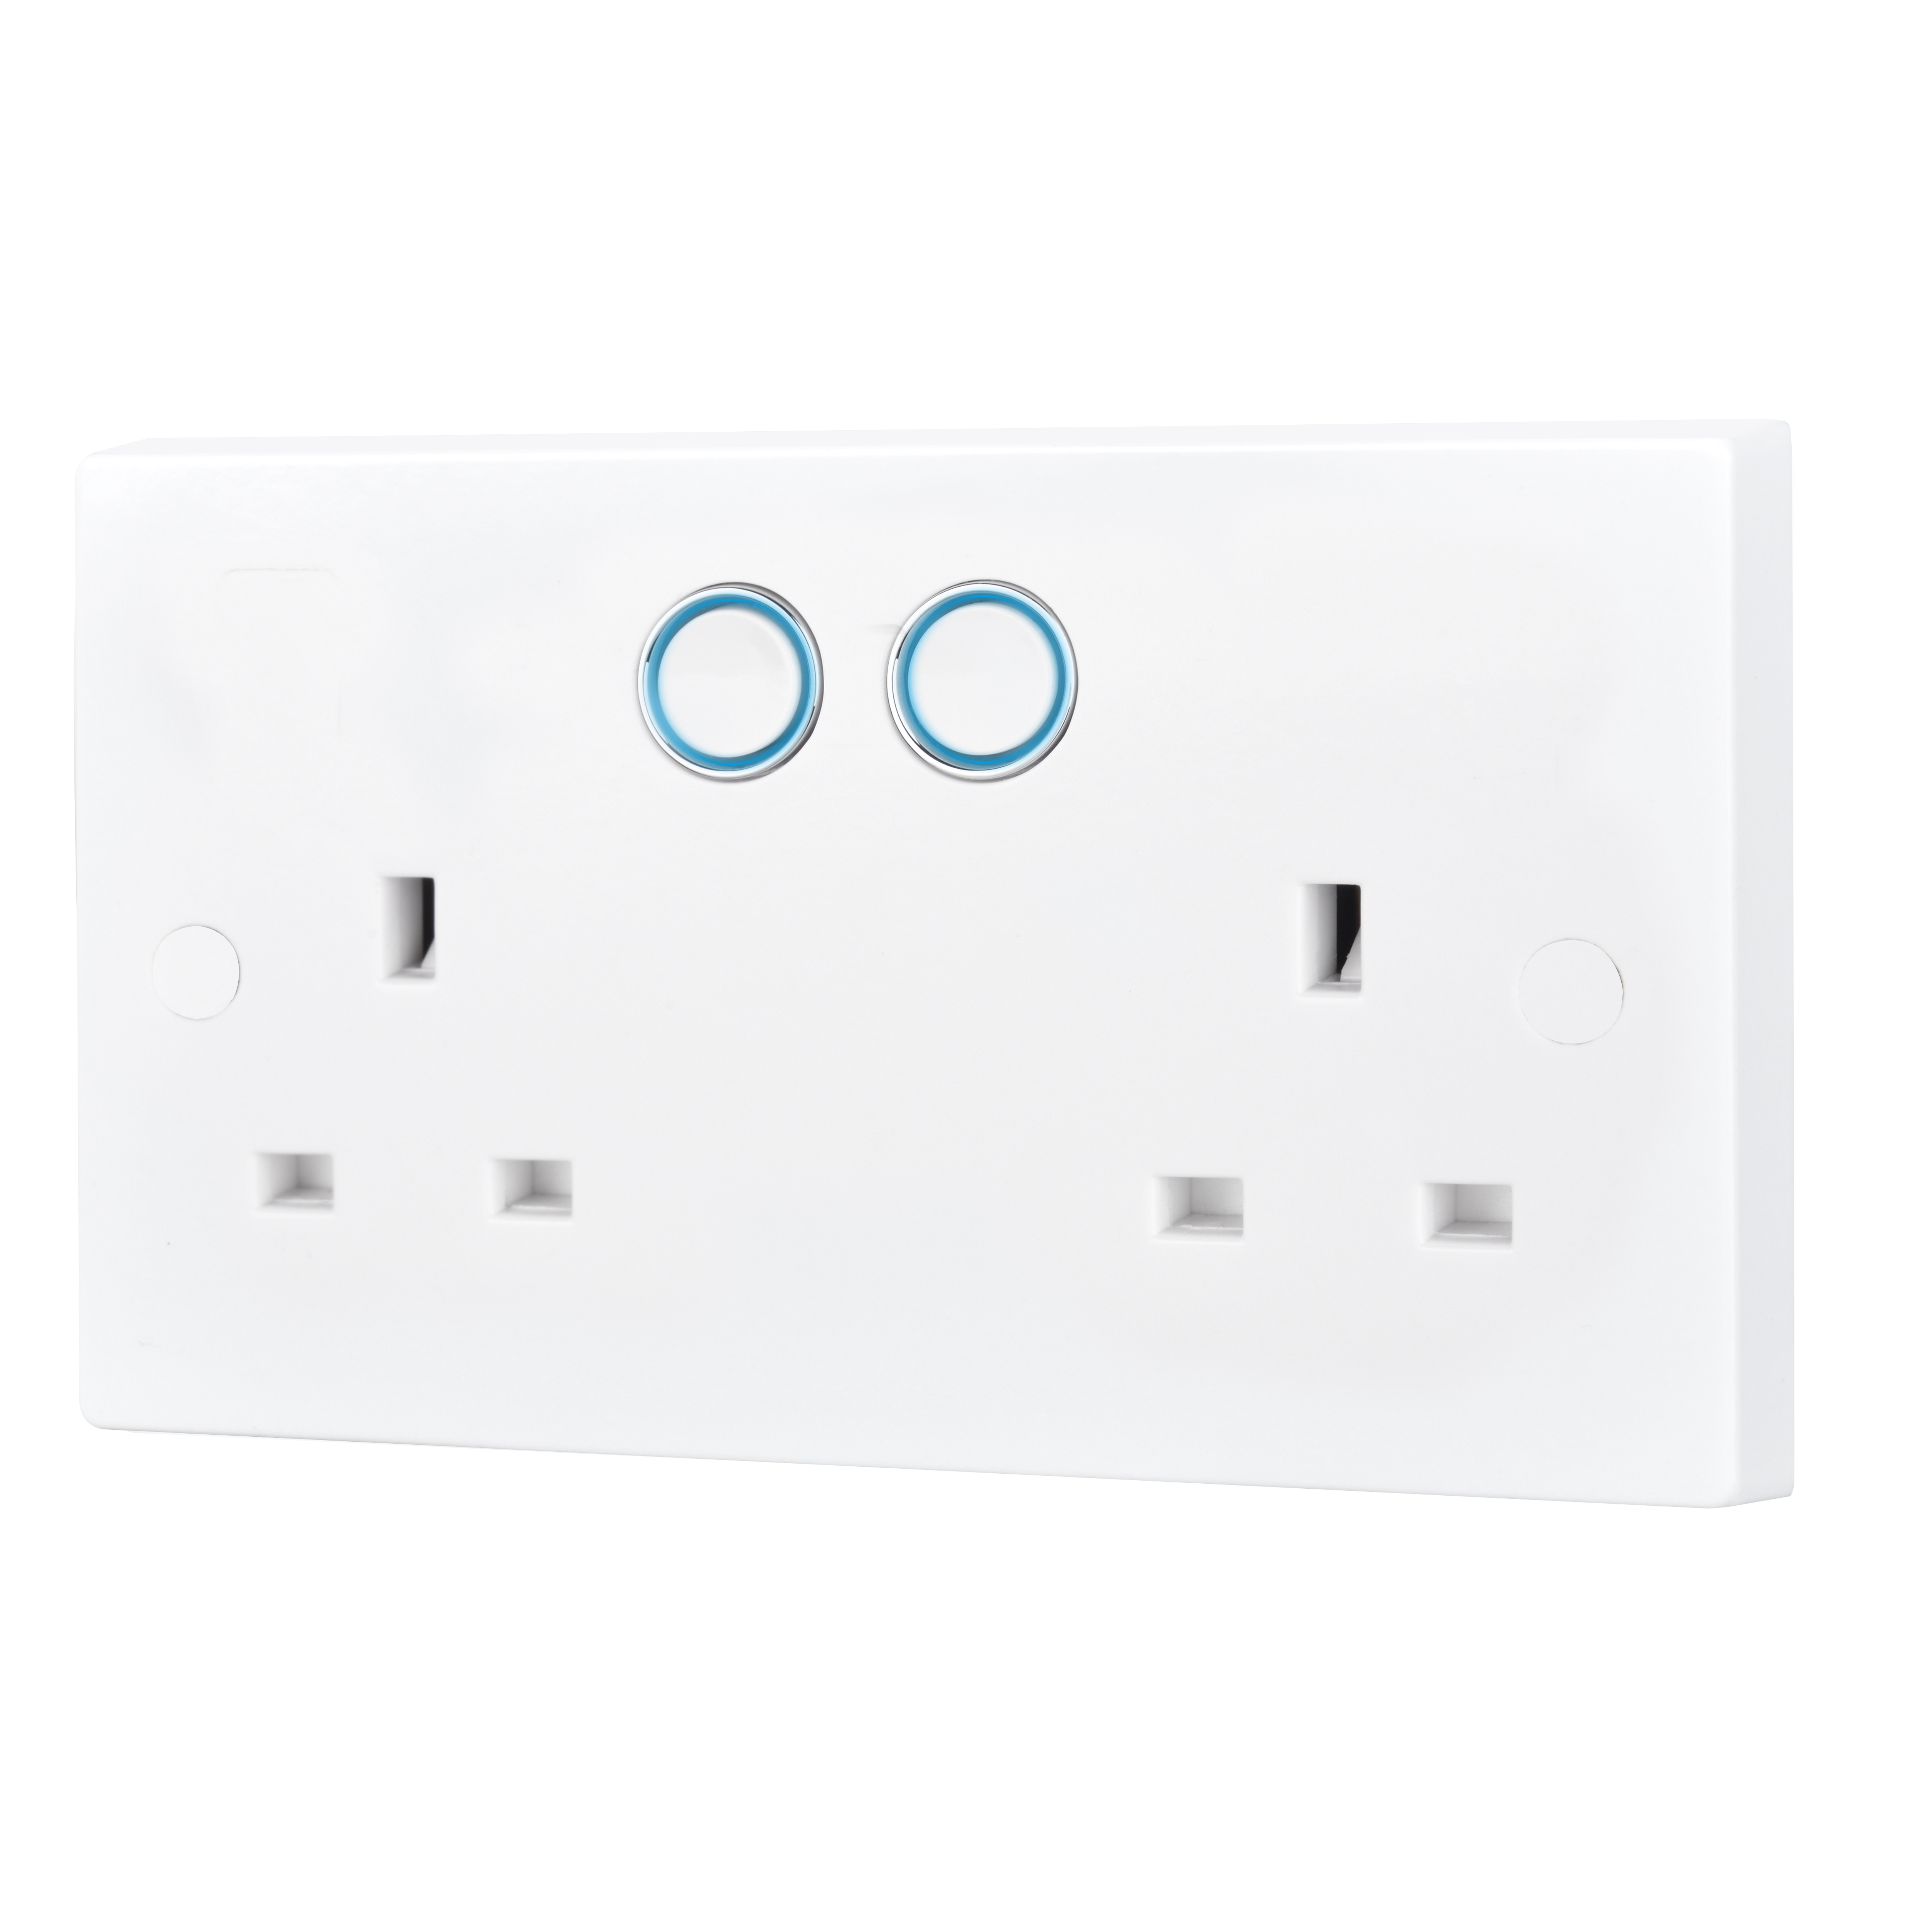 922HC_01-BGWifiControlledWallSocket(UK)-A1-with-Screw-covers_On.png